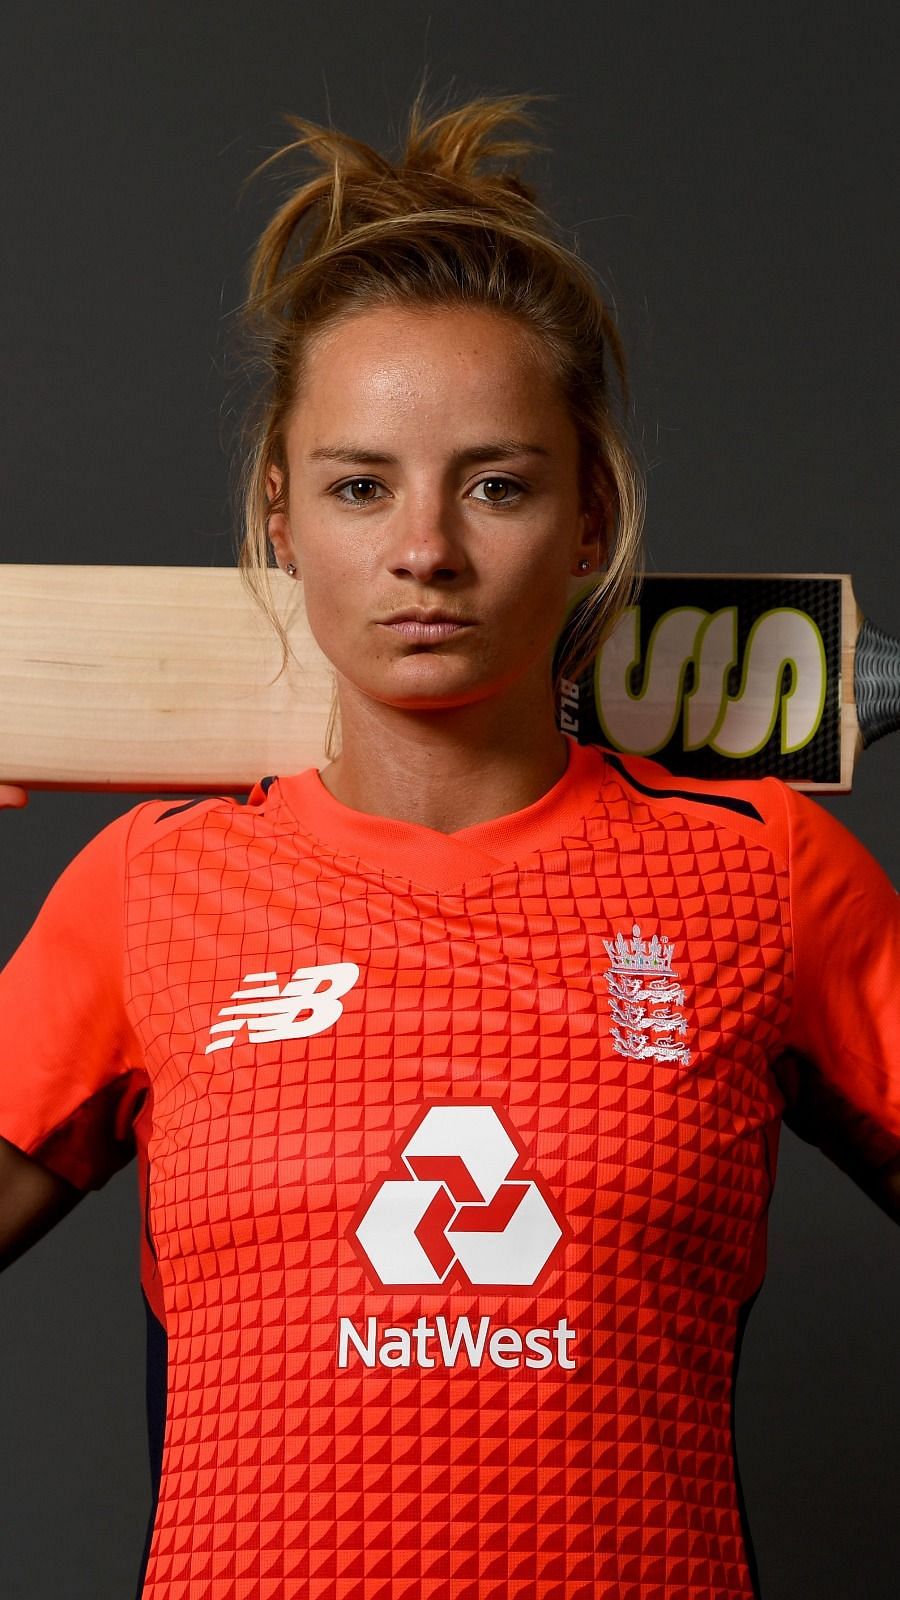 Danielle Wyatt reveals why she donned jersey No. 22 for IPL 2018